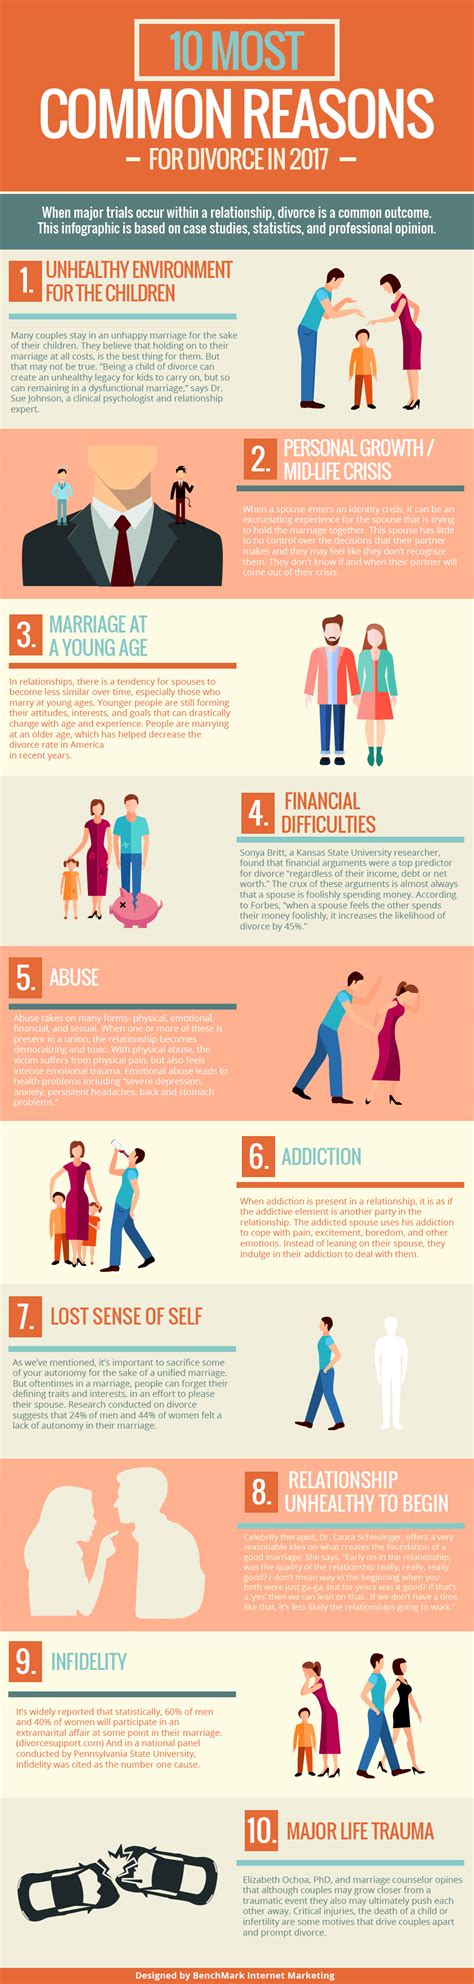 10 Common Reasons for Divorce 2017 - Cool Daily Infographics